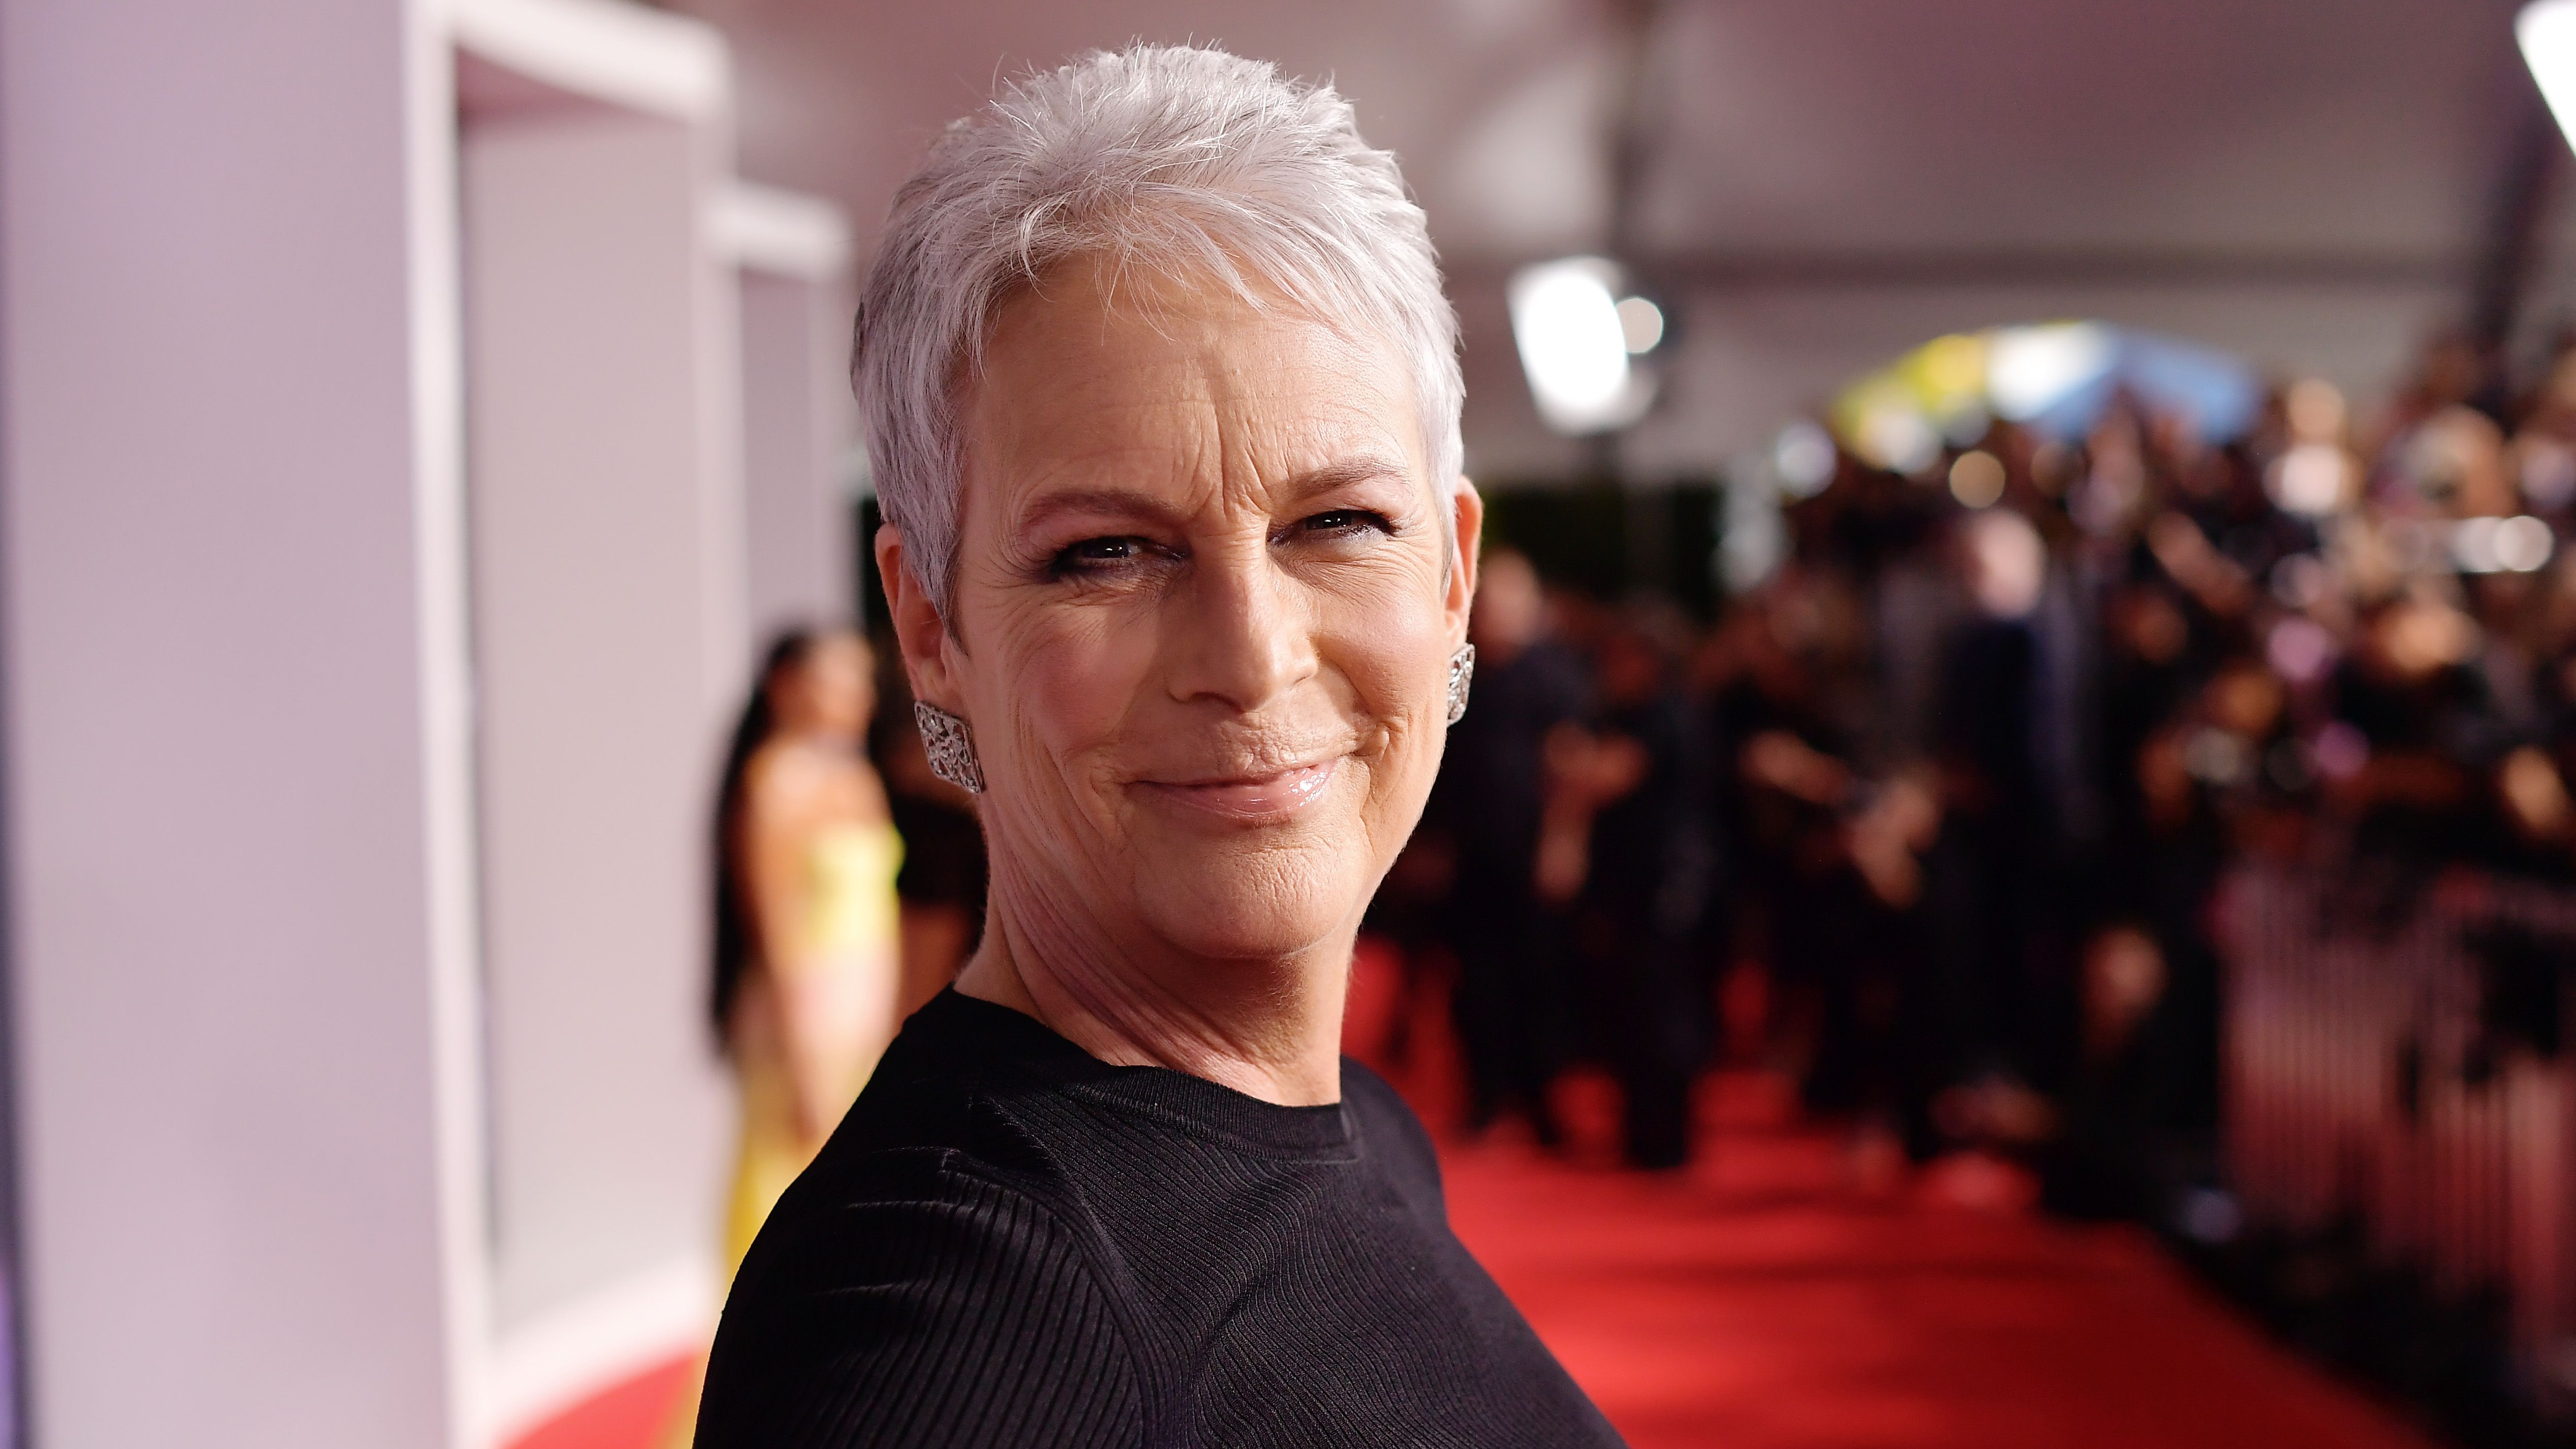 Jamie Lee Curtis just shared a naked photo on Instagram